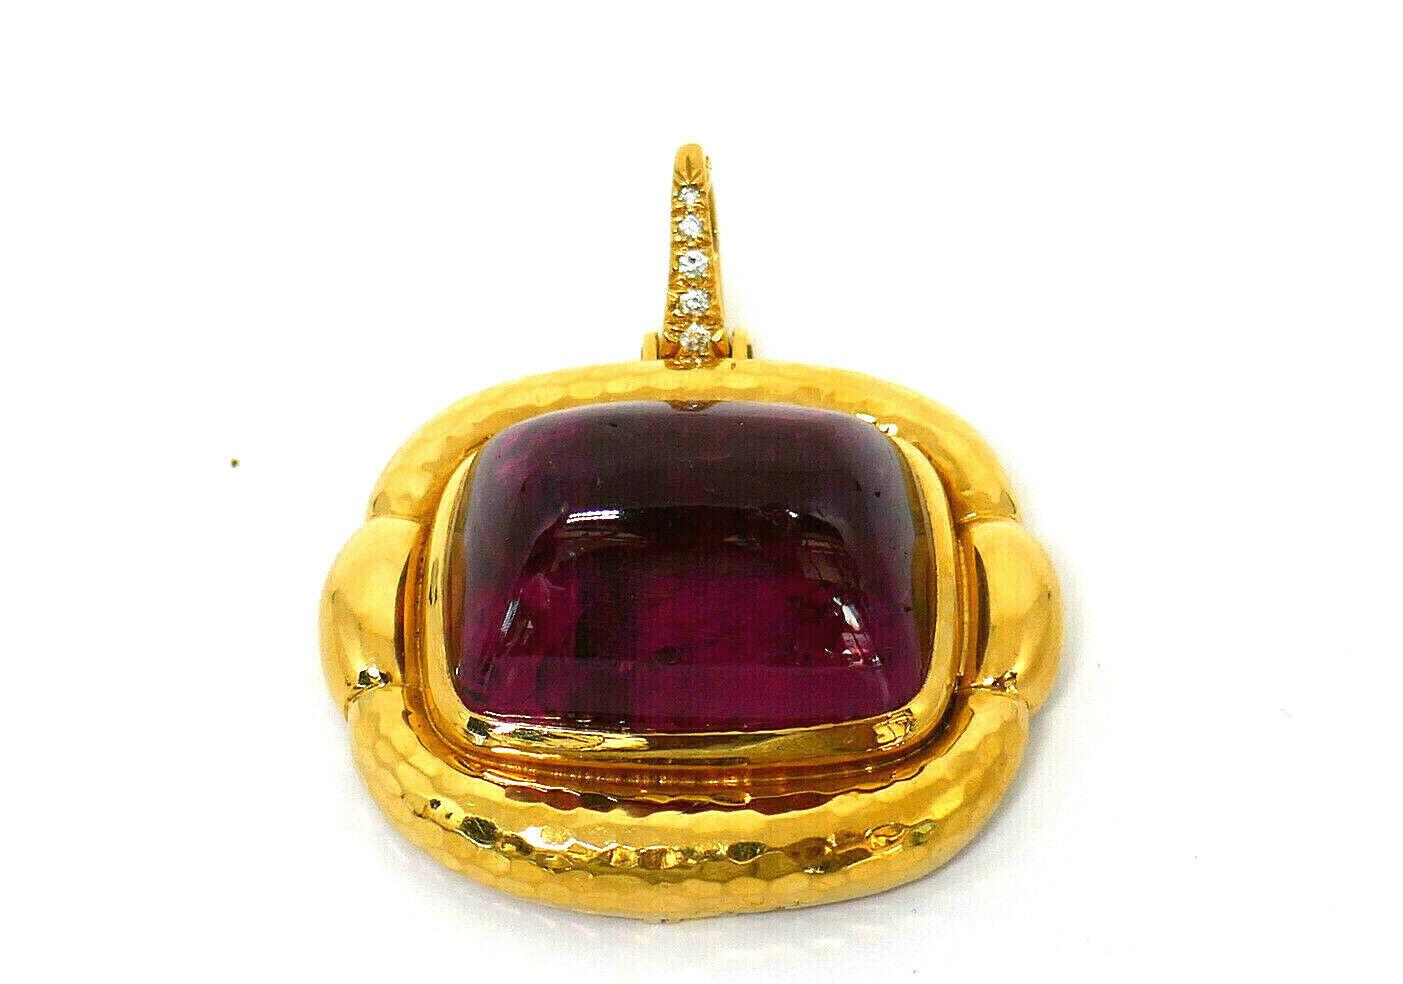 Distinctively chunky, bold pieces from Andrew Clunn. The set contains of a pair of earrings and a pendant. Made of 18k yellow gold, pink tourmaline and diamonds. Perfectly polished, candy-like tourmaline amazingly paired with elegant gold color.